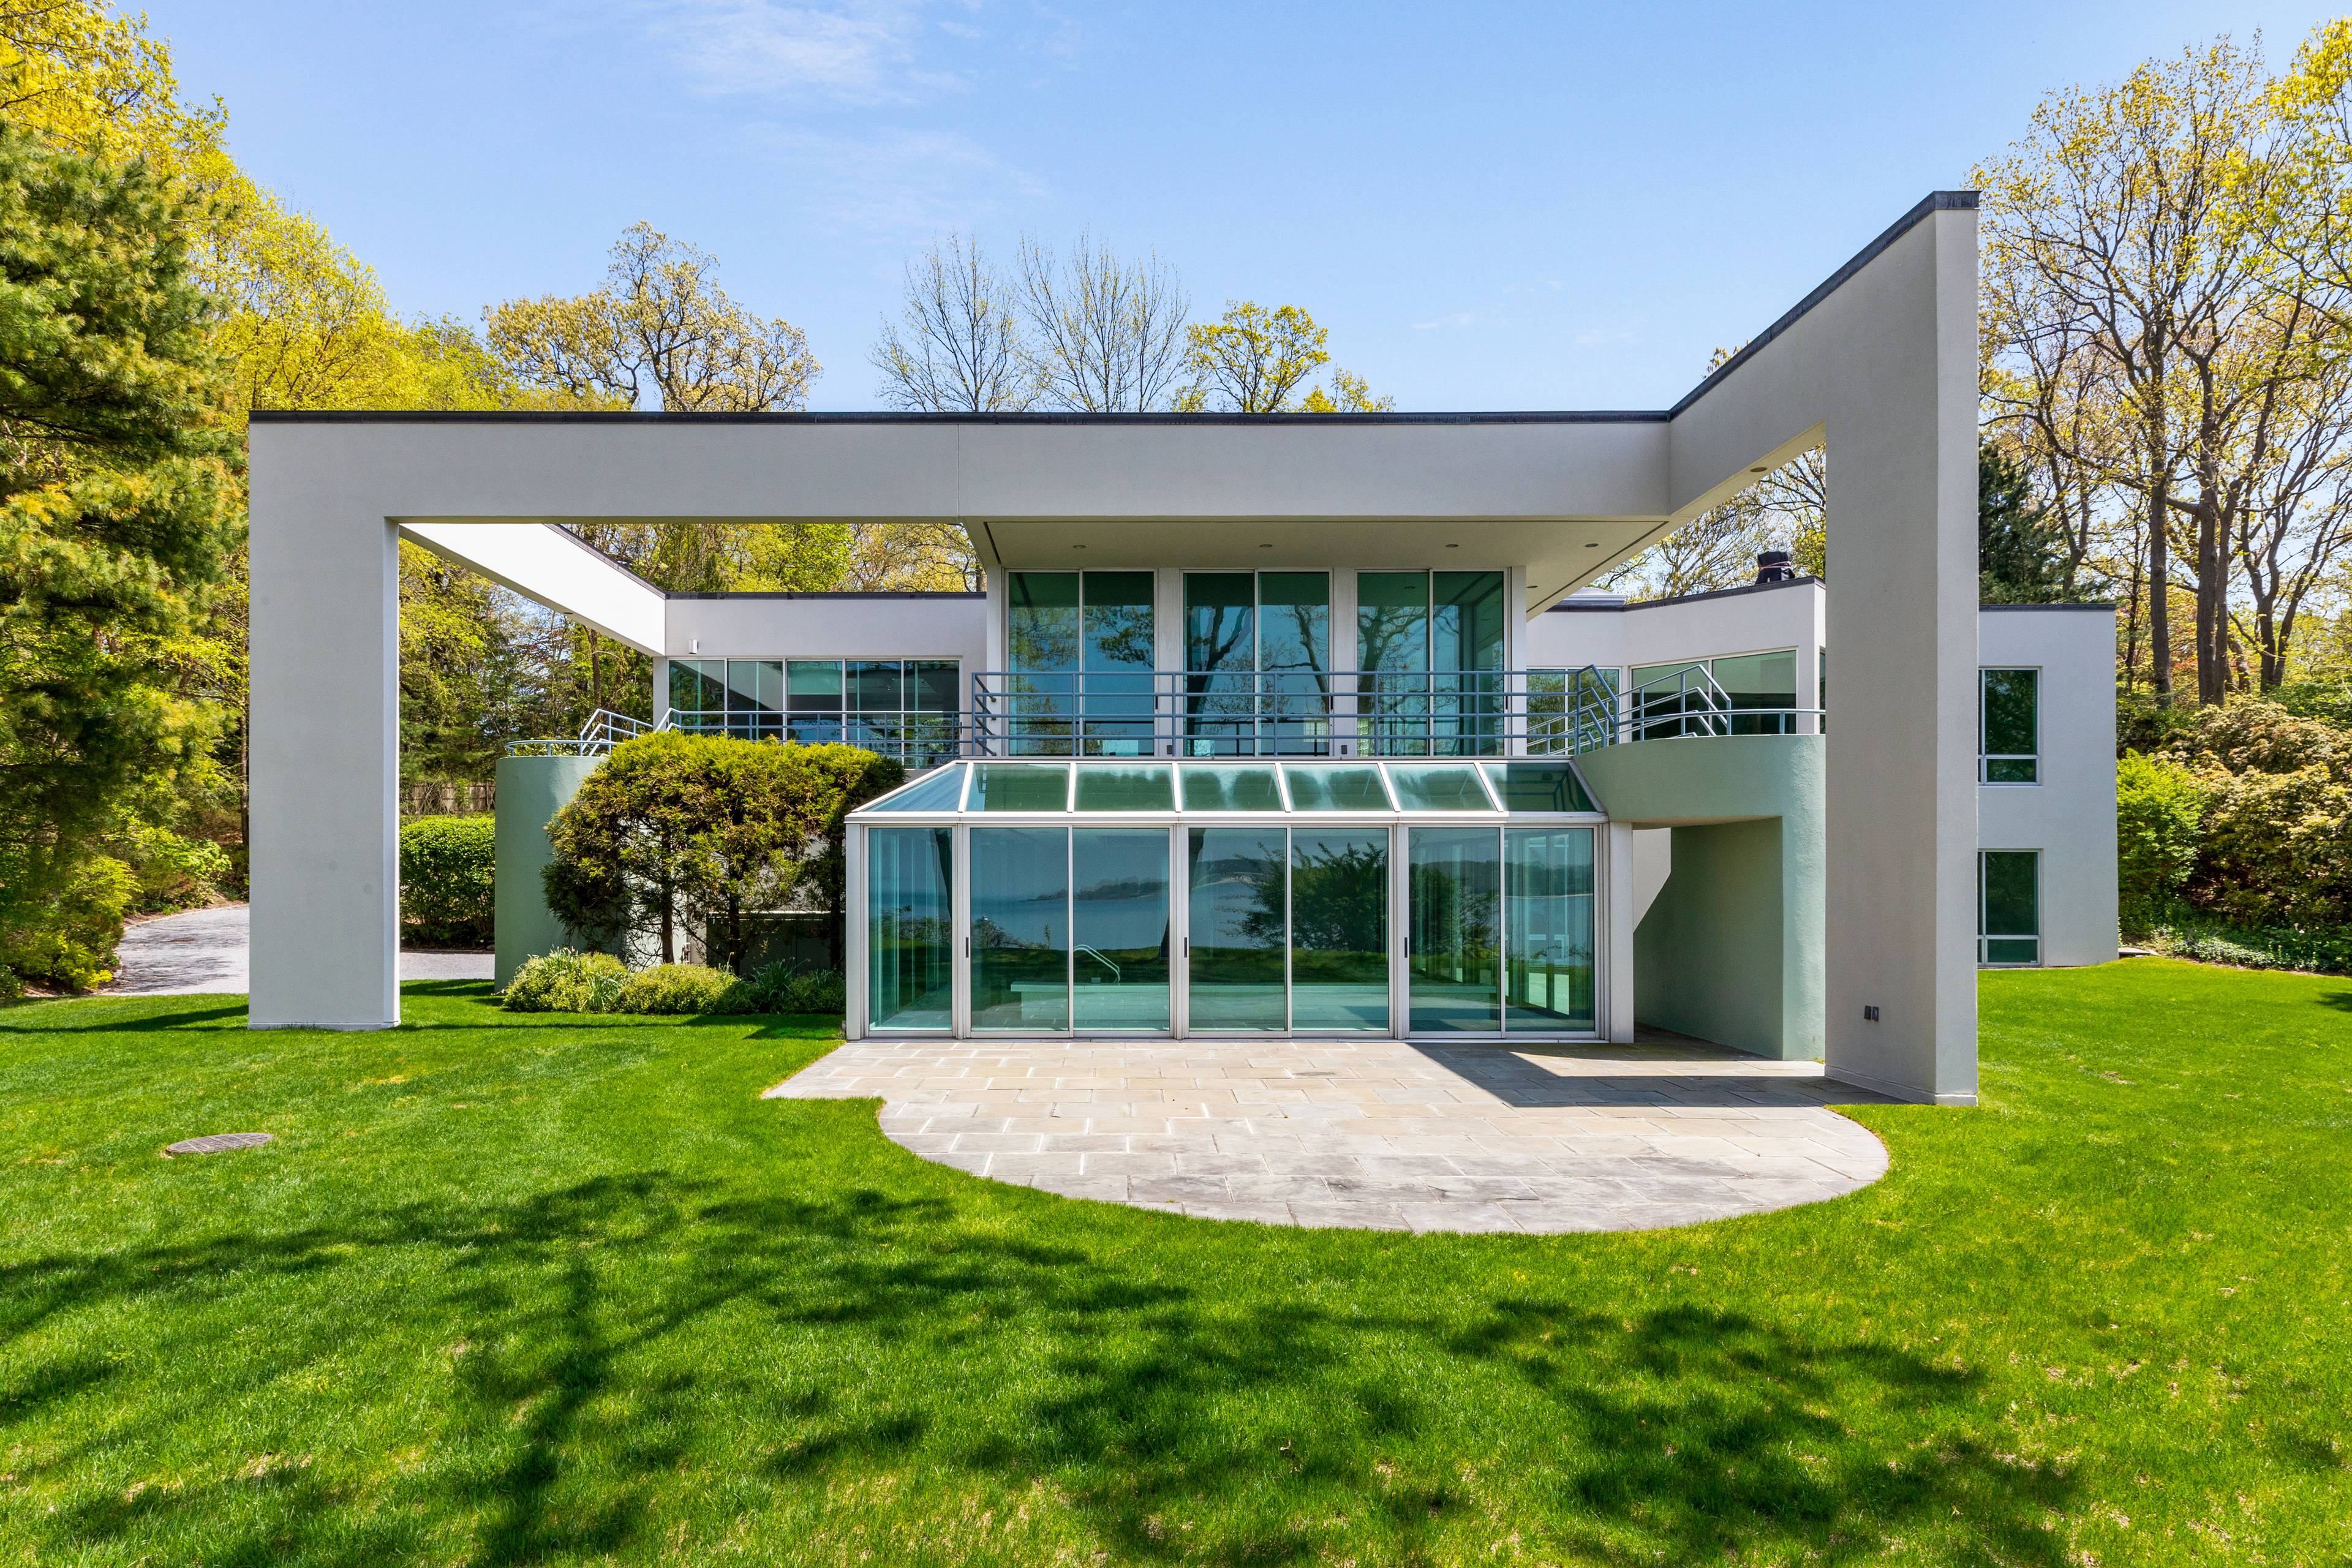 Exquisite Waterfront Modern Architectural Gem on 3 Acres in Lloyd Harbor